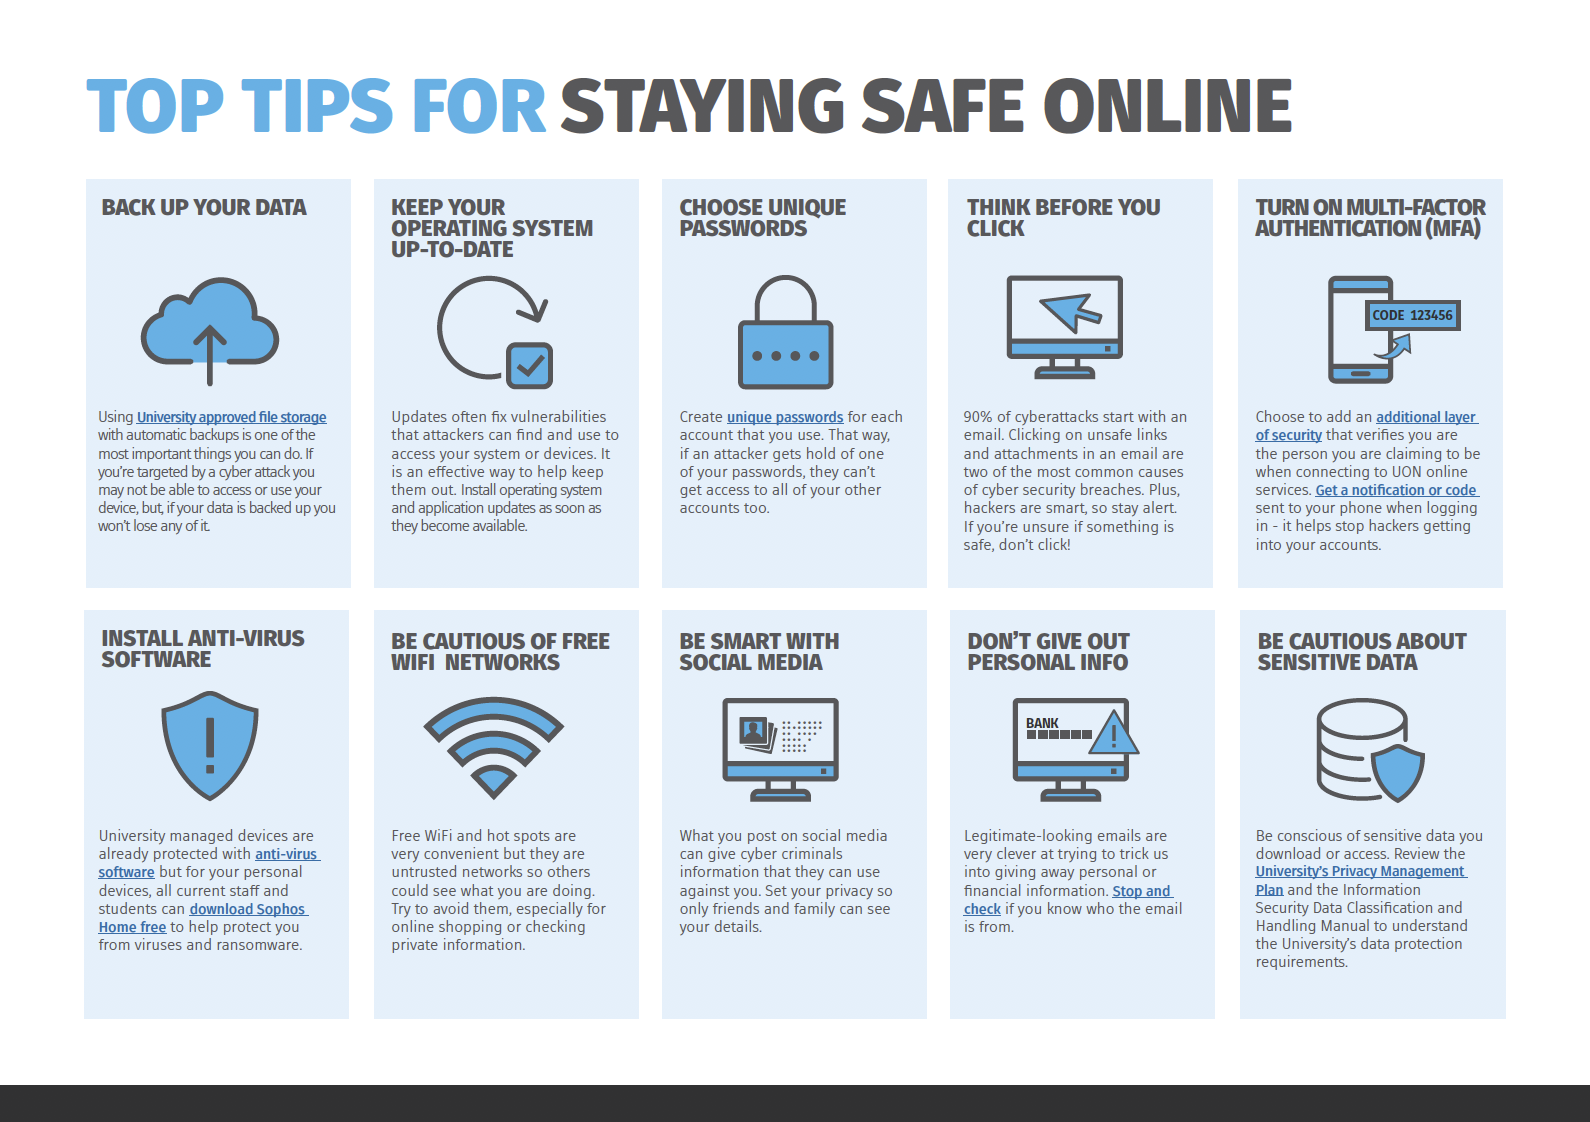 Top Ten Tips for Staying Safe Online